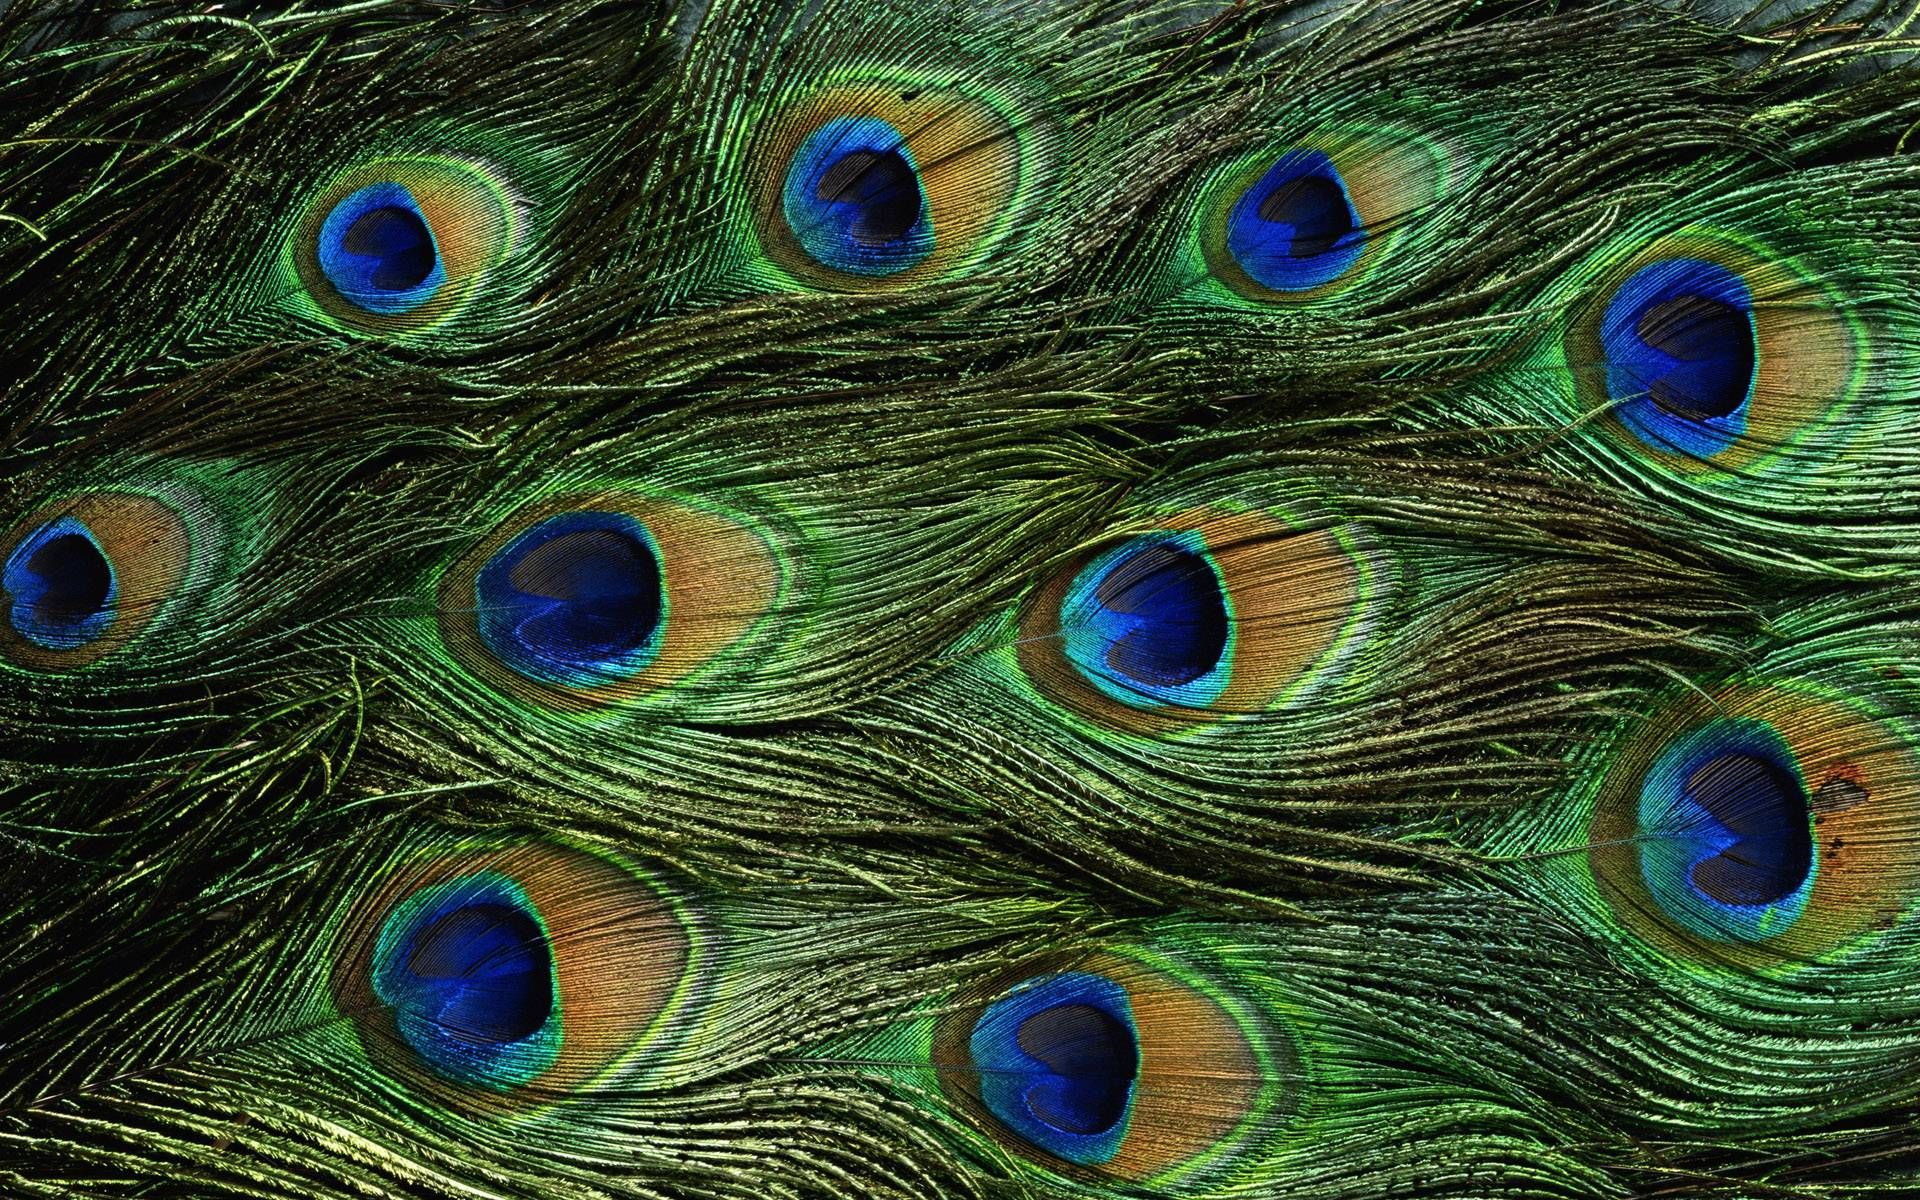 1920x1200 Wallpapers Of Peacock Feathers HD 2015 | Feather wallpaper, Feather background, Peacock wallpaper